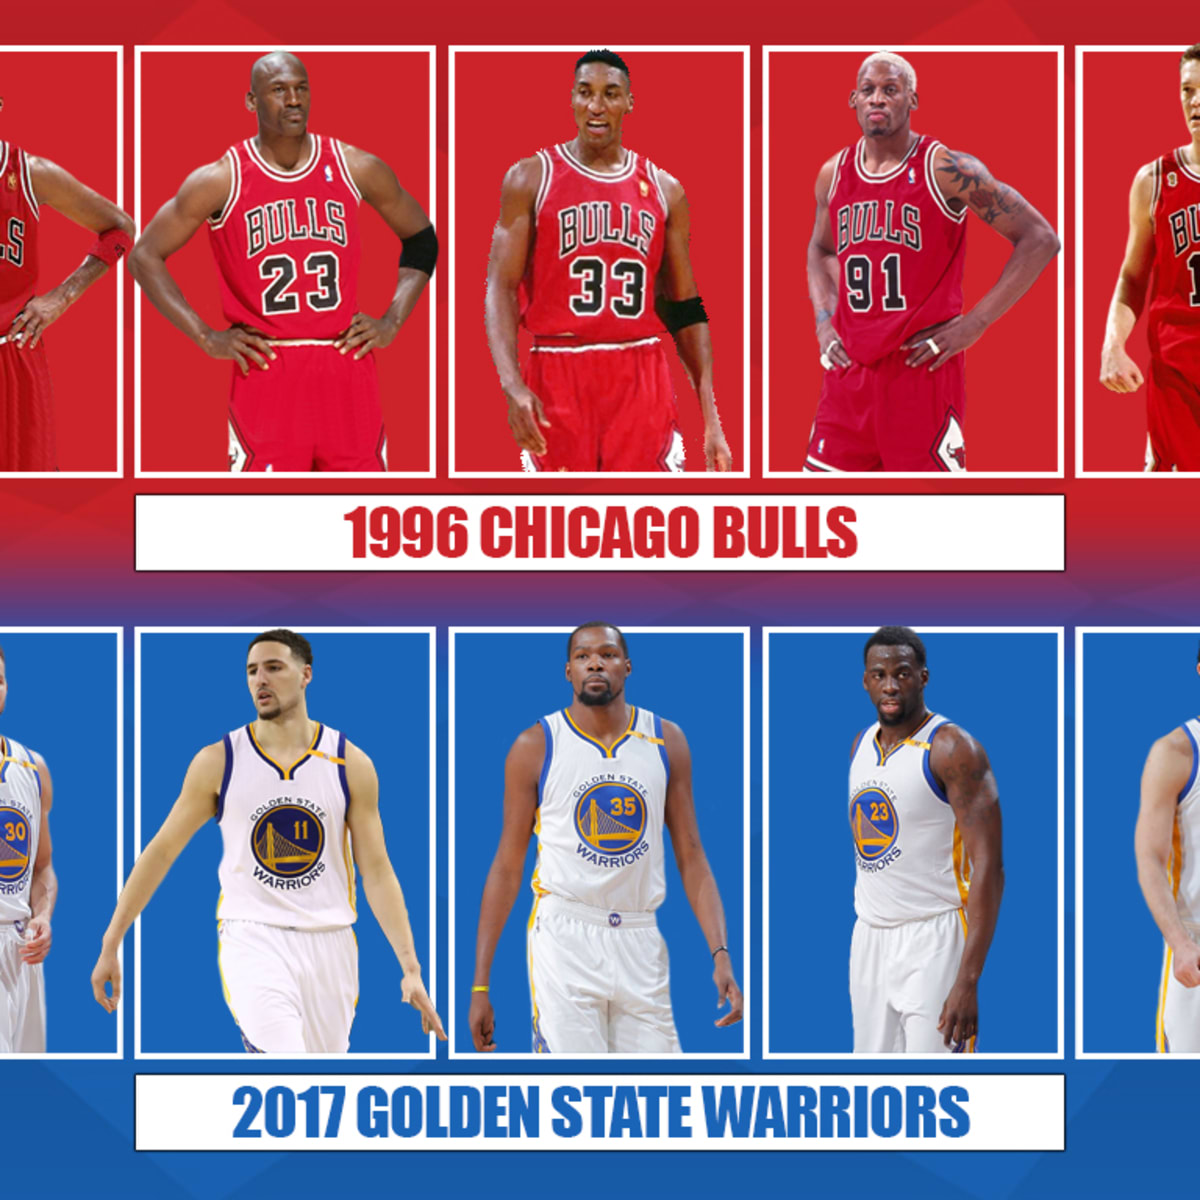 2017 Warriors or Jordan's 1996 Bulls? Vegas oddsmakers know which